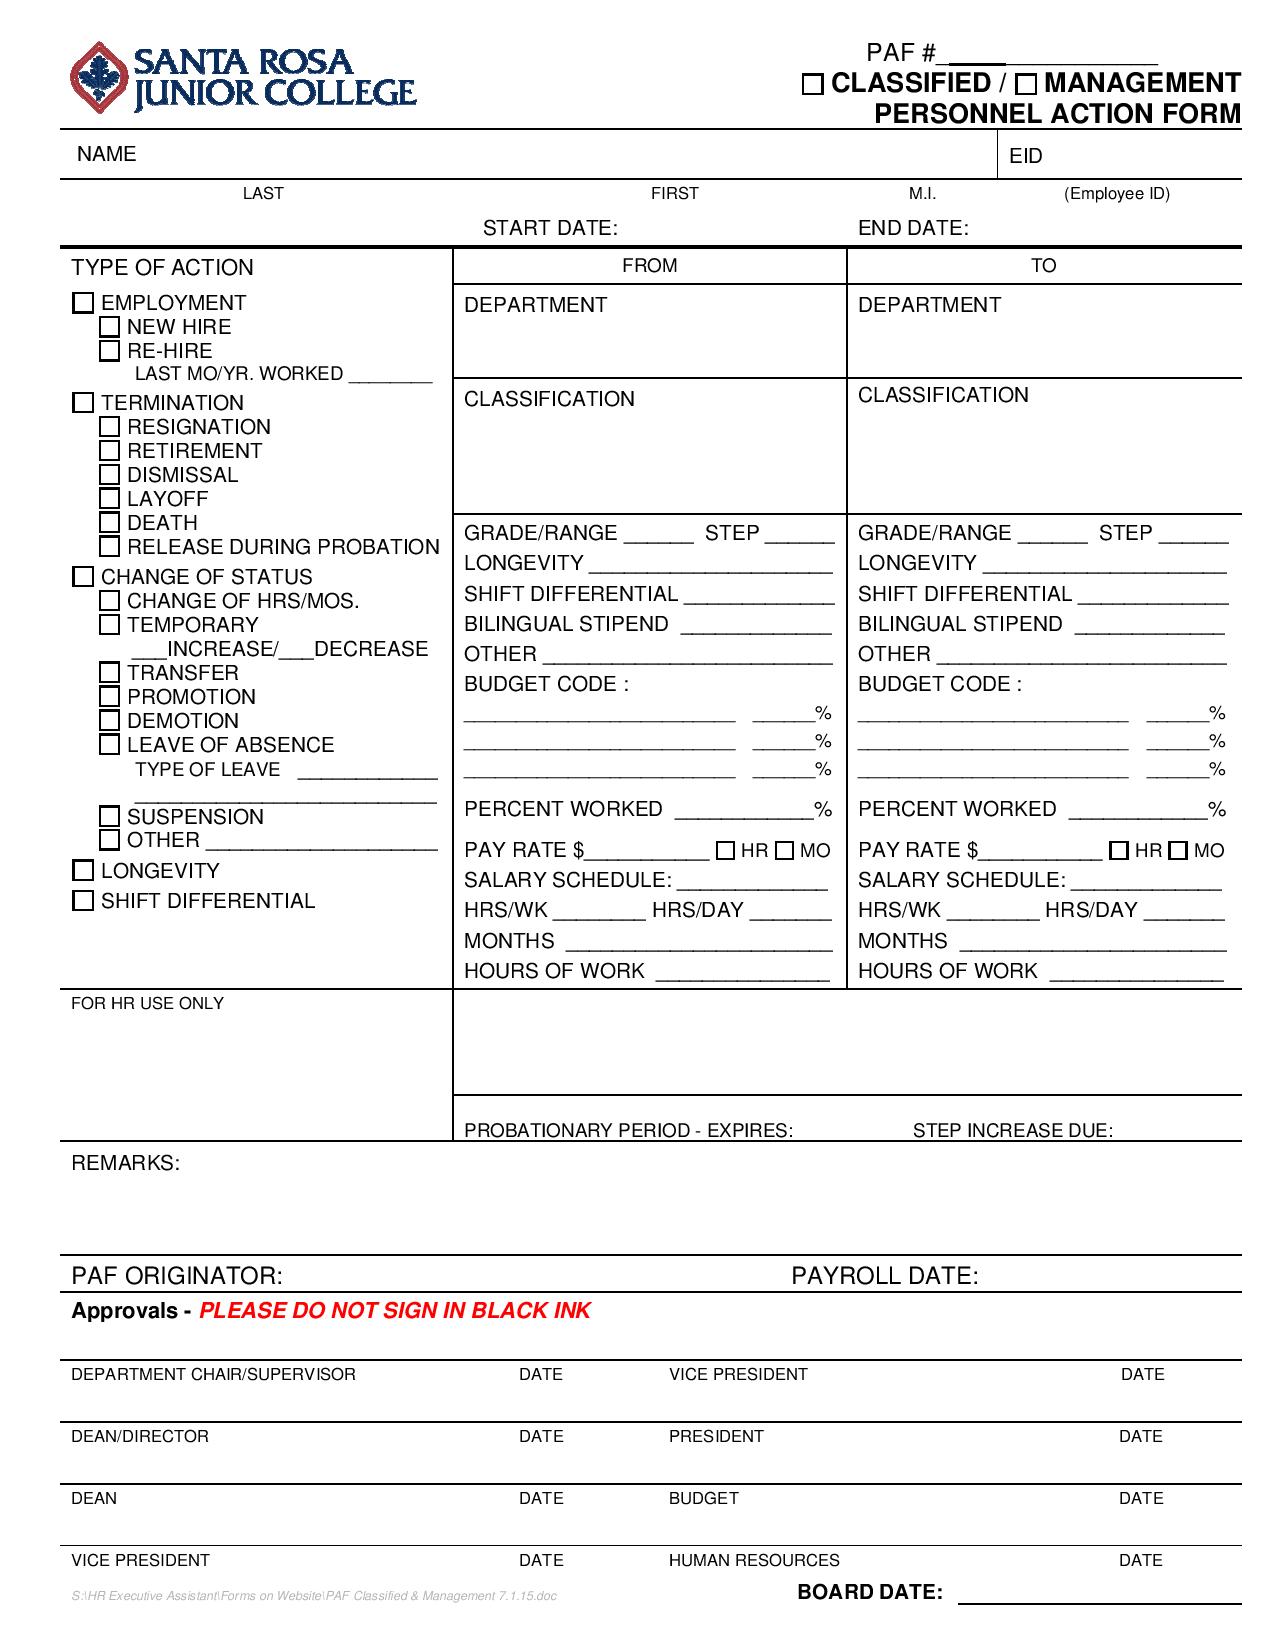 classified or management personnel action form page 001